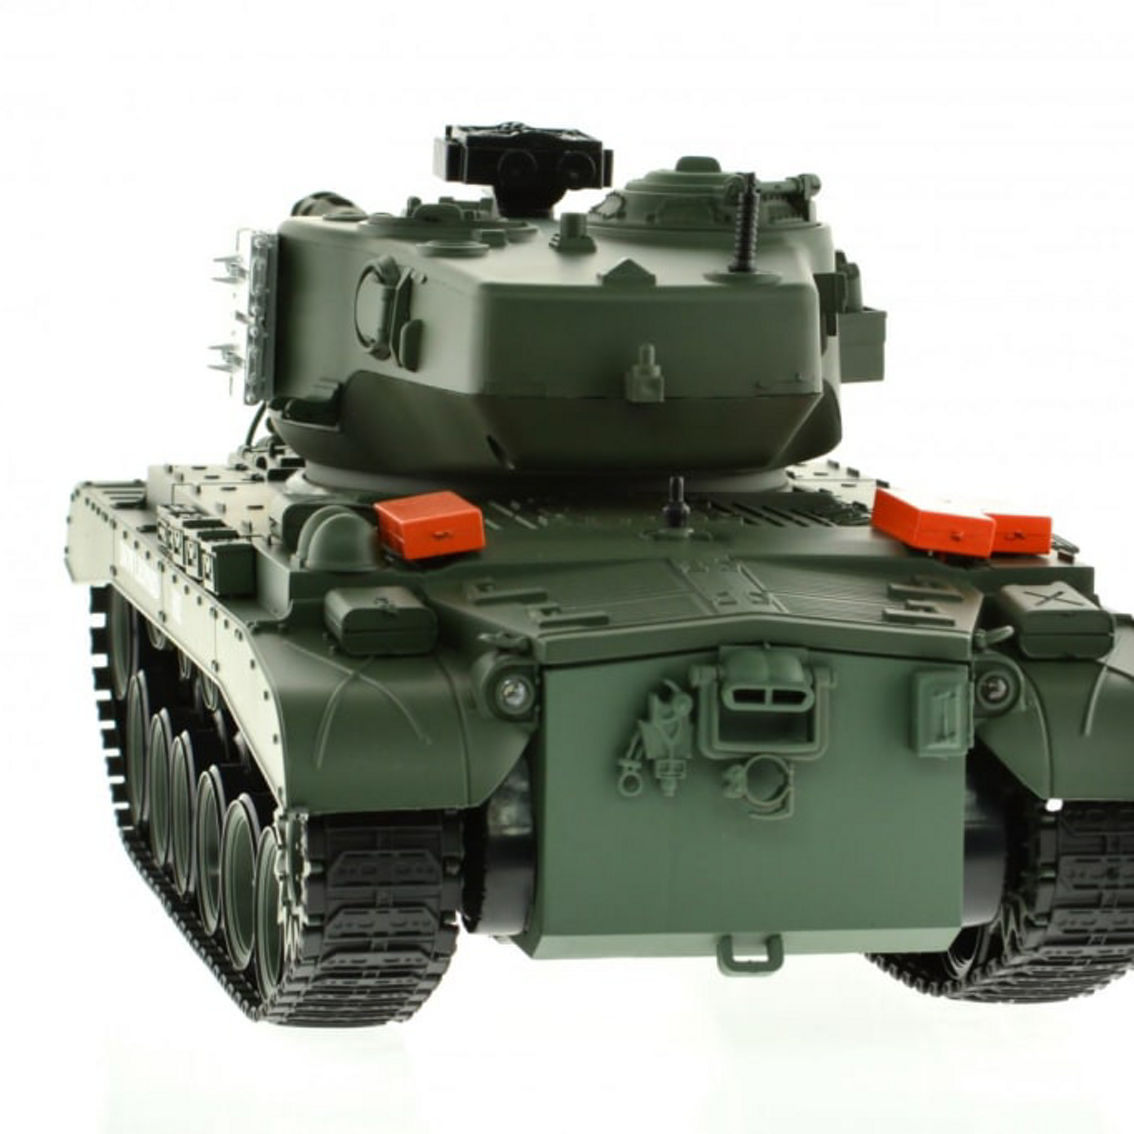 CIS-YZ-814 1:18 scale WWII USA Snow Leopard tank with lights sound and BB gun - Image 4 of 5